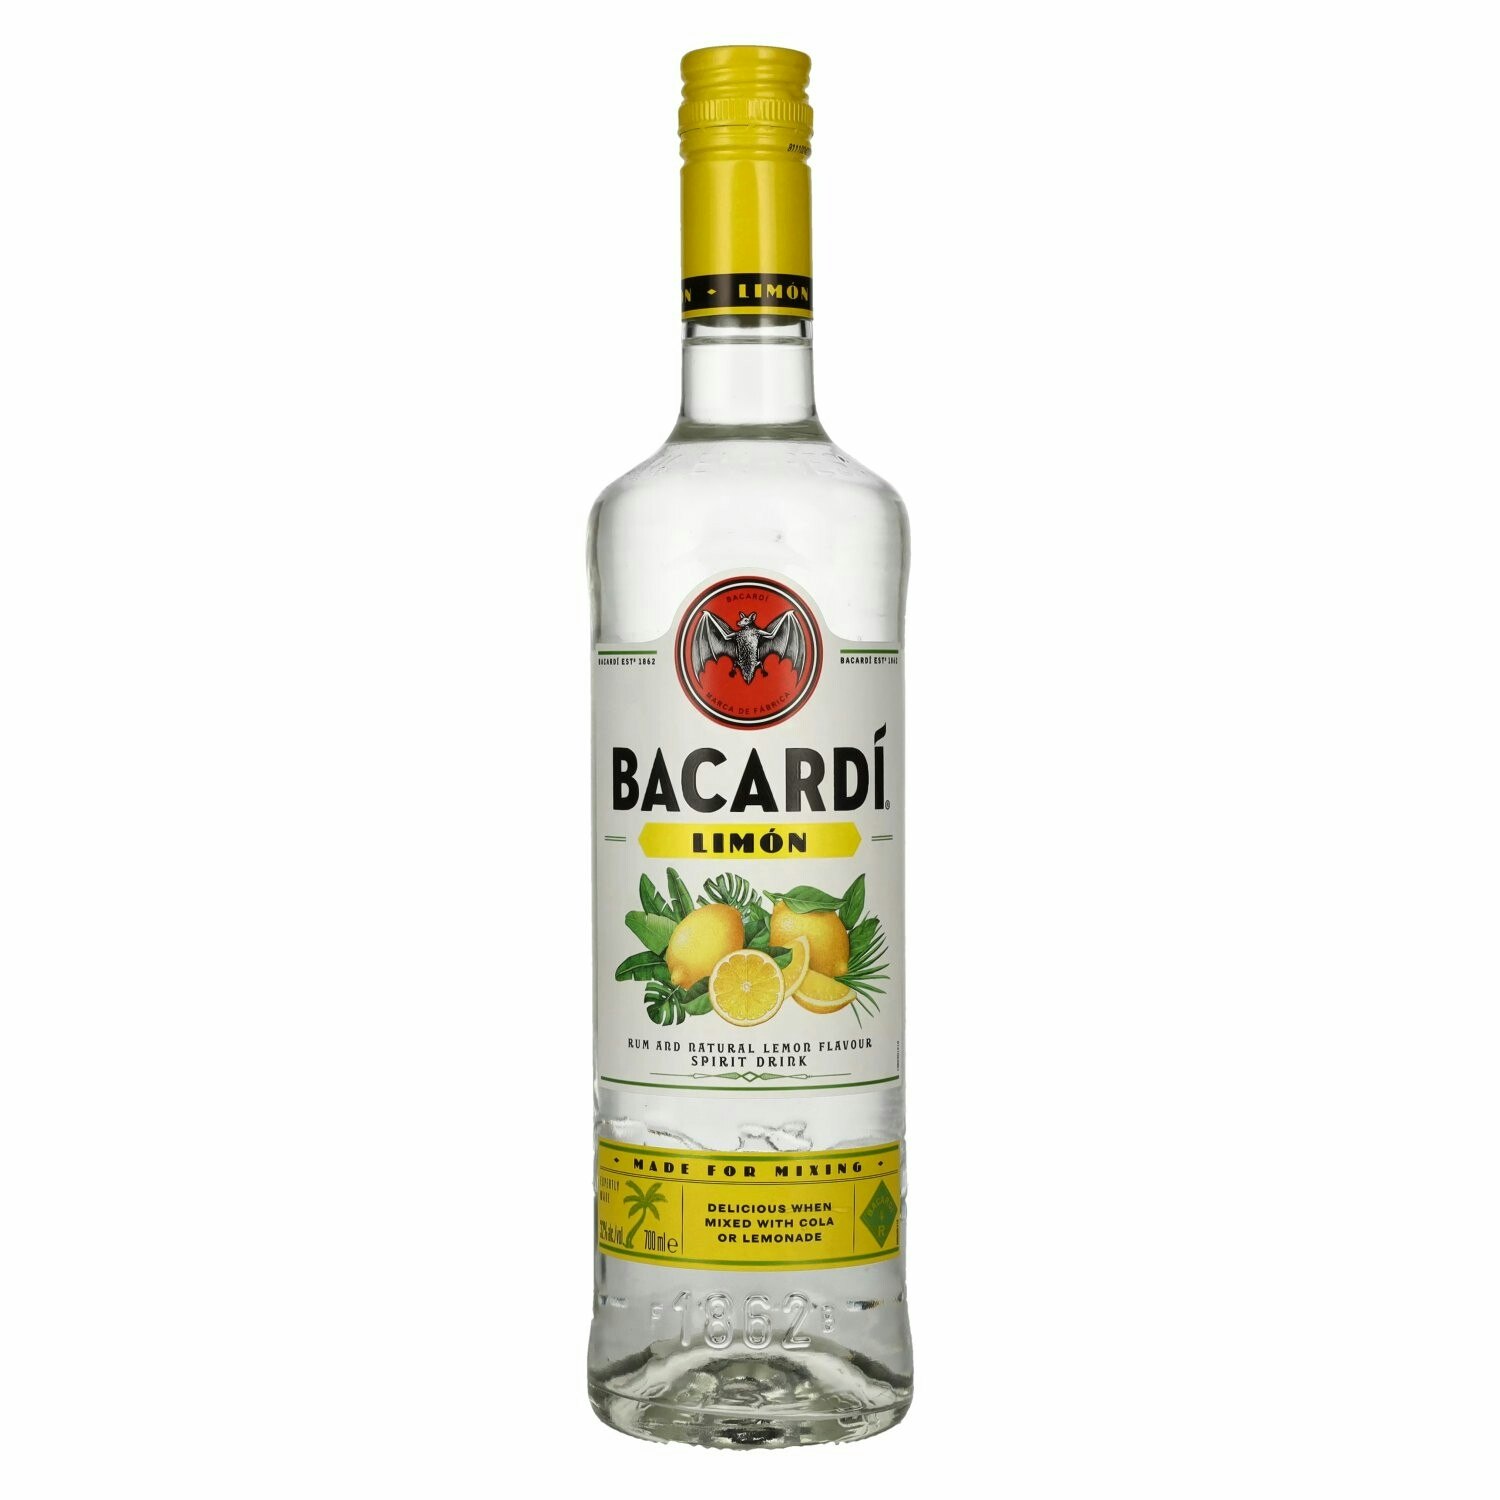 Bacardi LIMÓN Rum With Natural Flavors 32% Vol. 0,7l